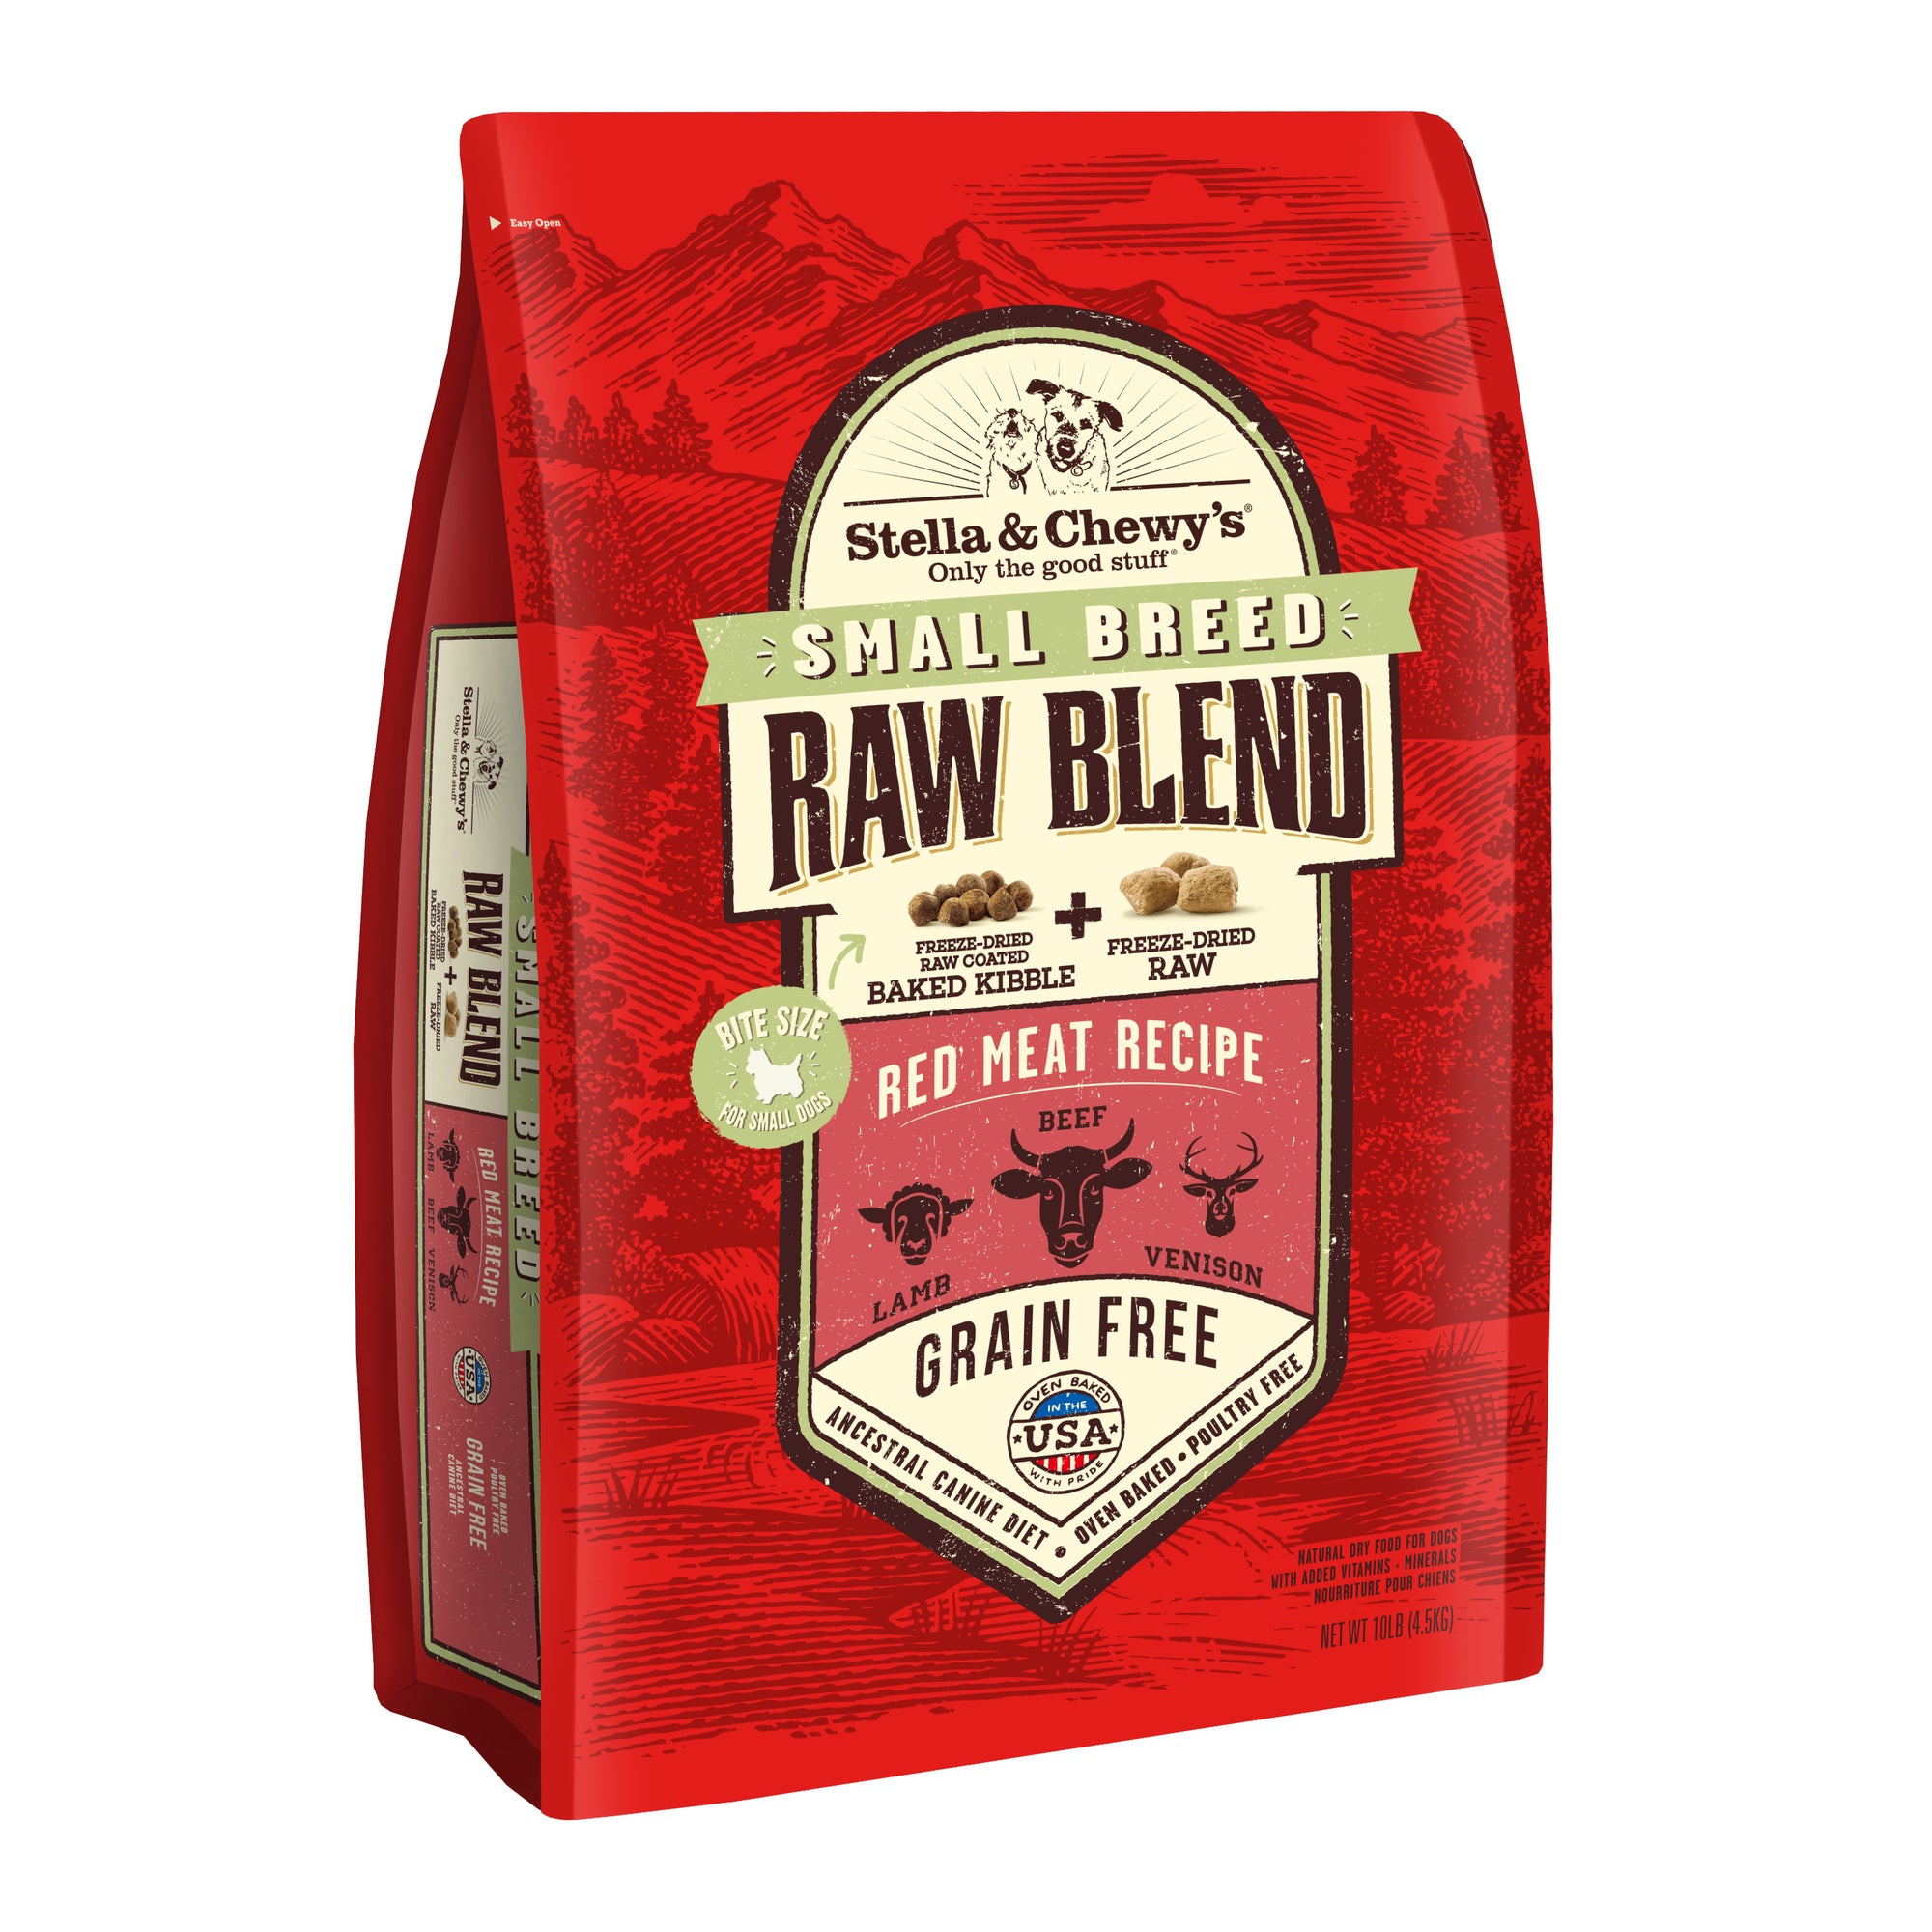 Stella & Chewy's SMALL BREED RED MEAT RAW BLEND KIBBLE